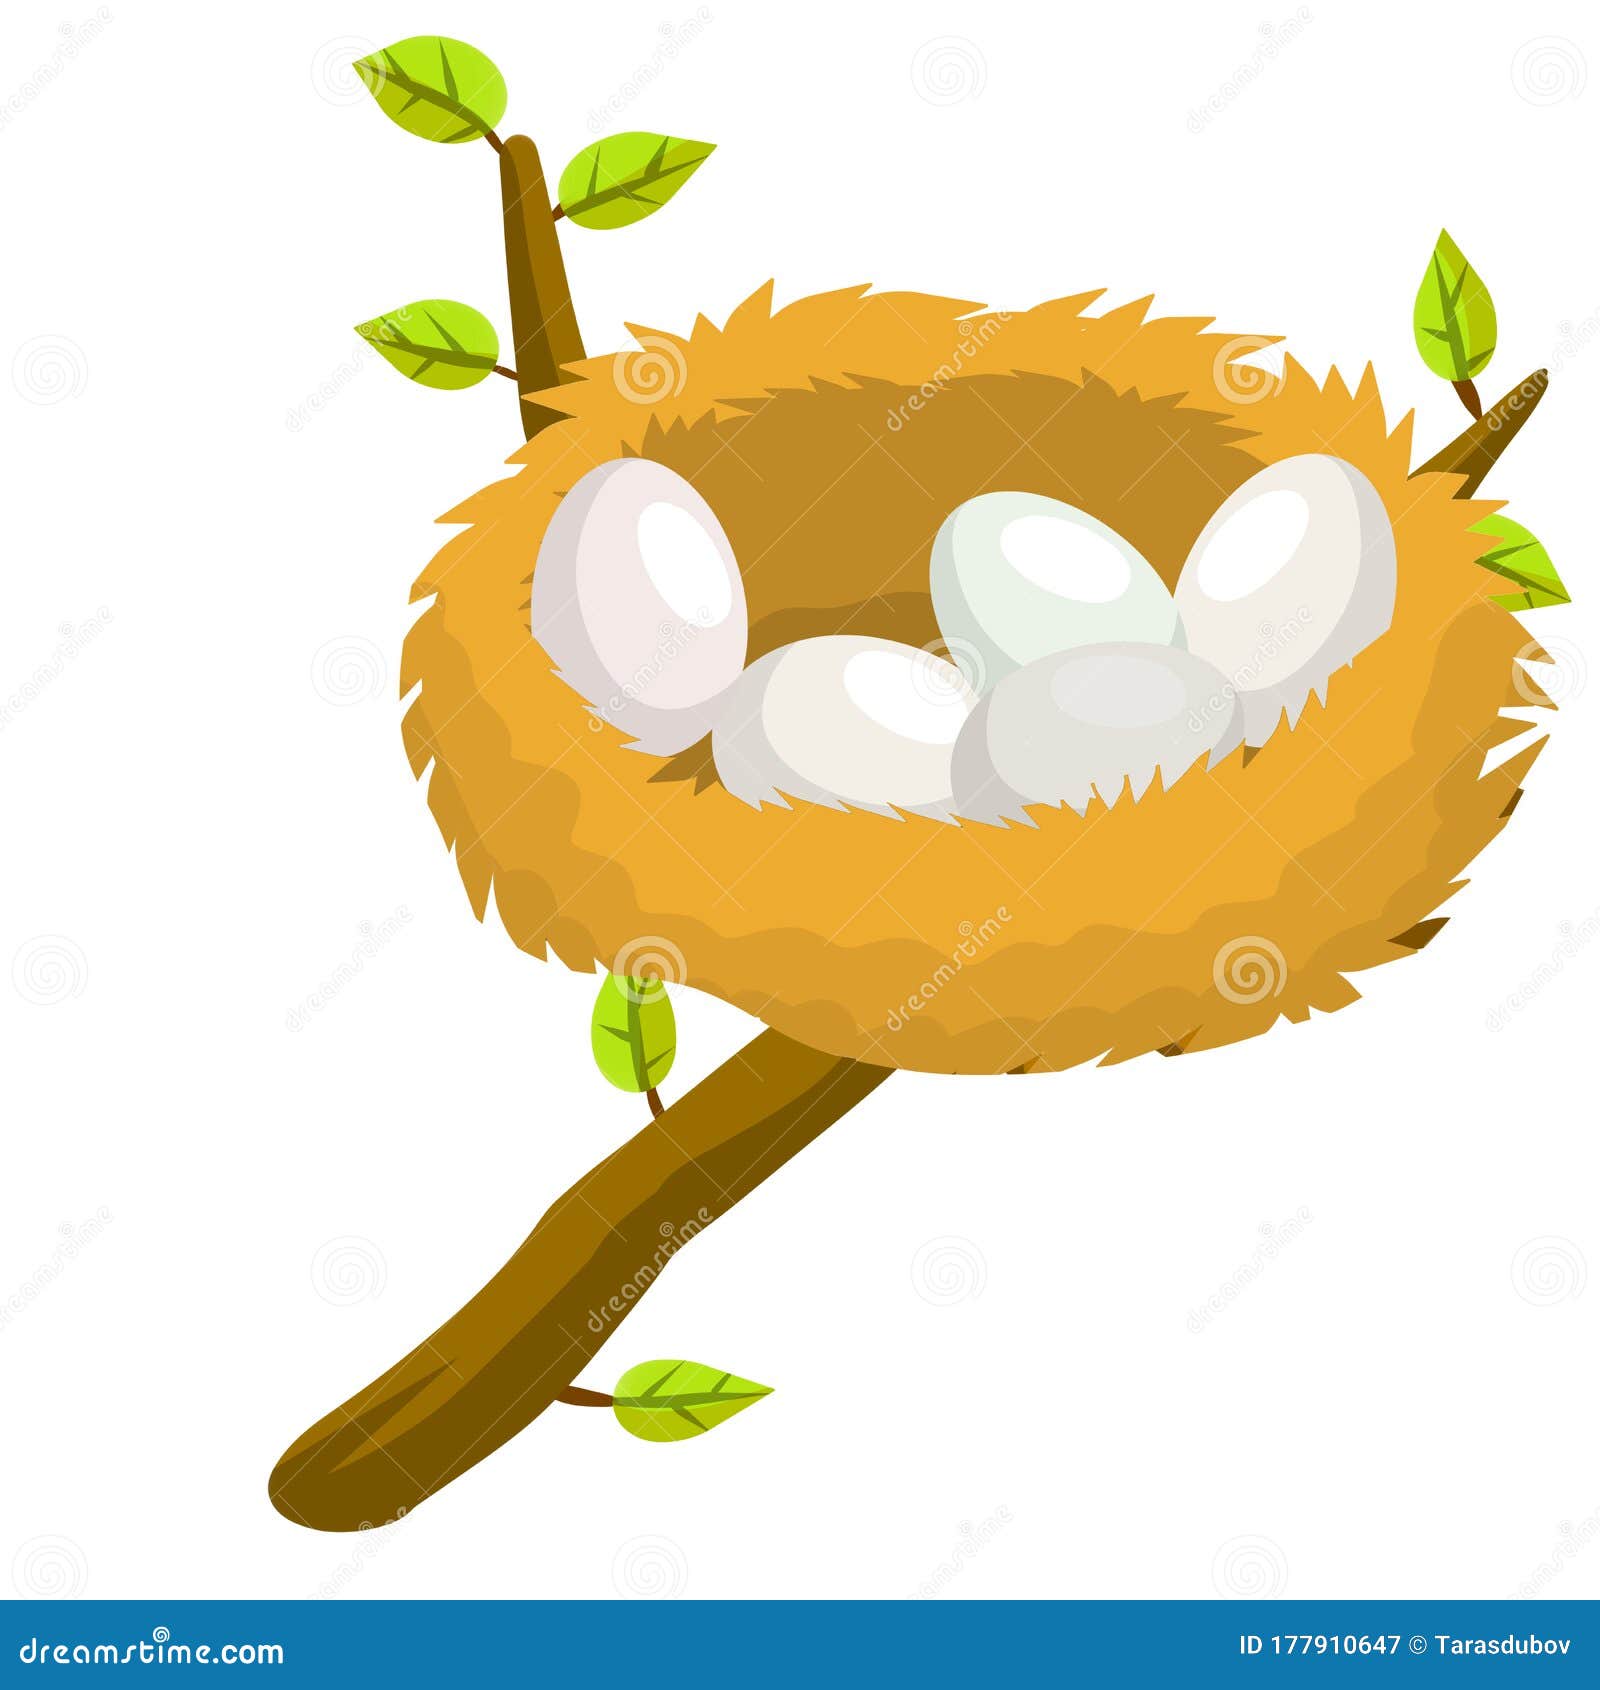 Nest and Egg. Bird House. Tree Branch with Leaves Stock Vector -  Illustration of cartoon, graphic: 177910647